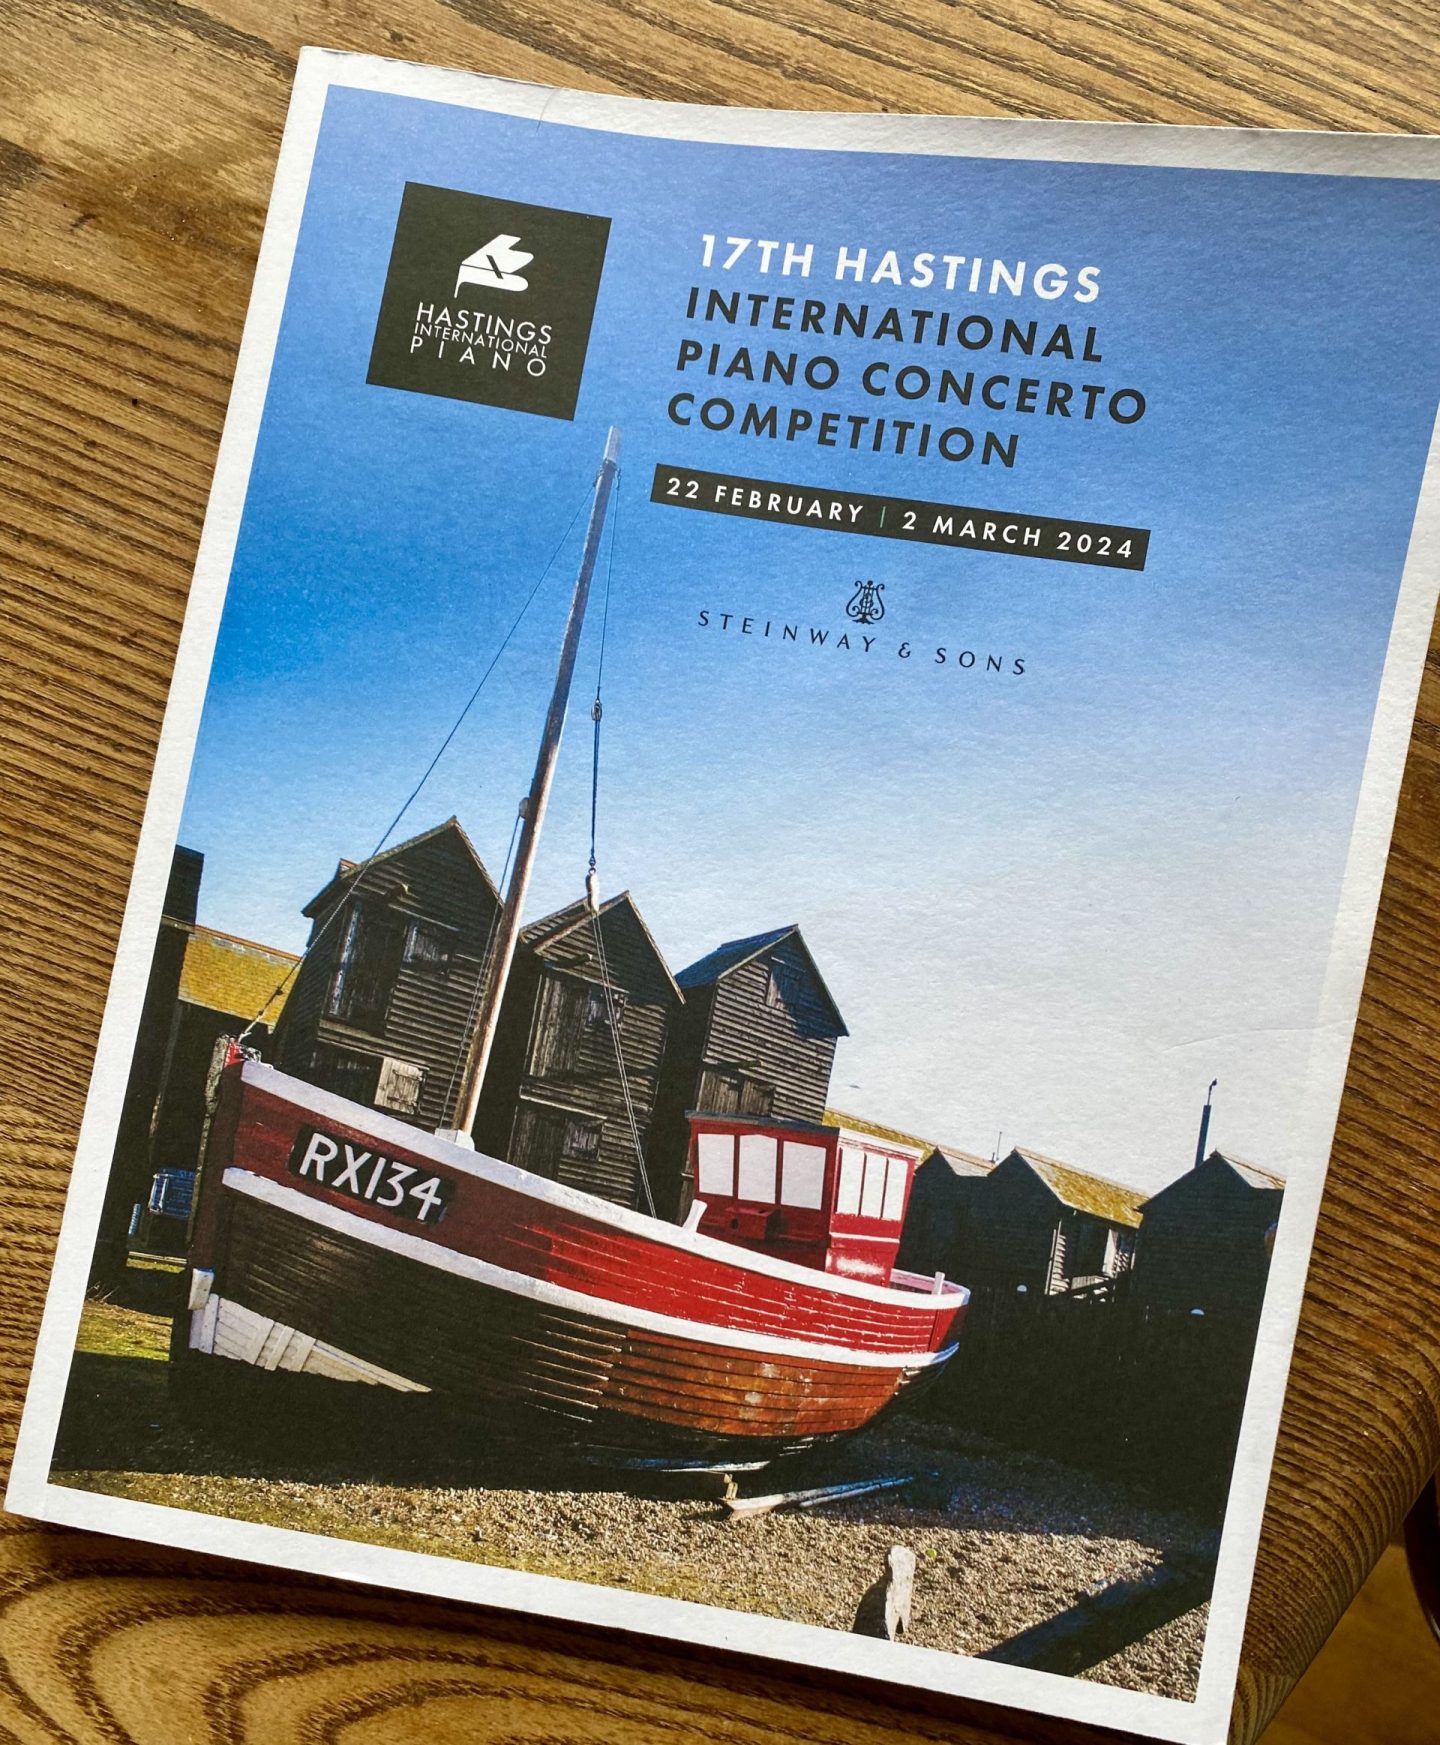 Hastings Battleaxe goes to the Hastings International Piano Concerto Competition (HIPCC) finals